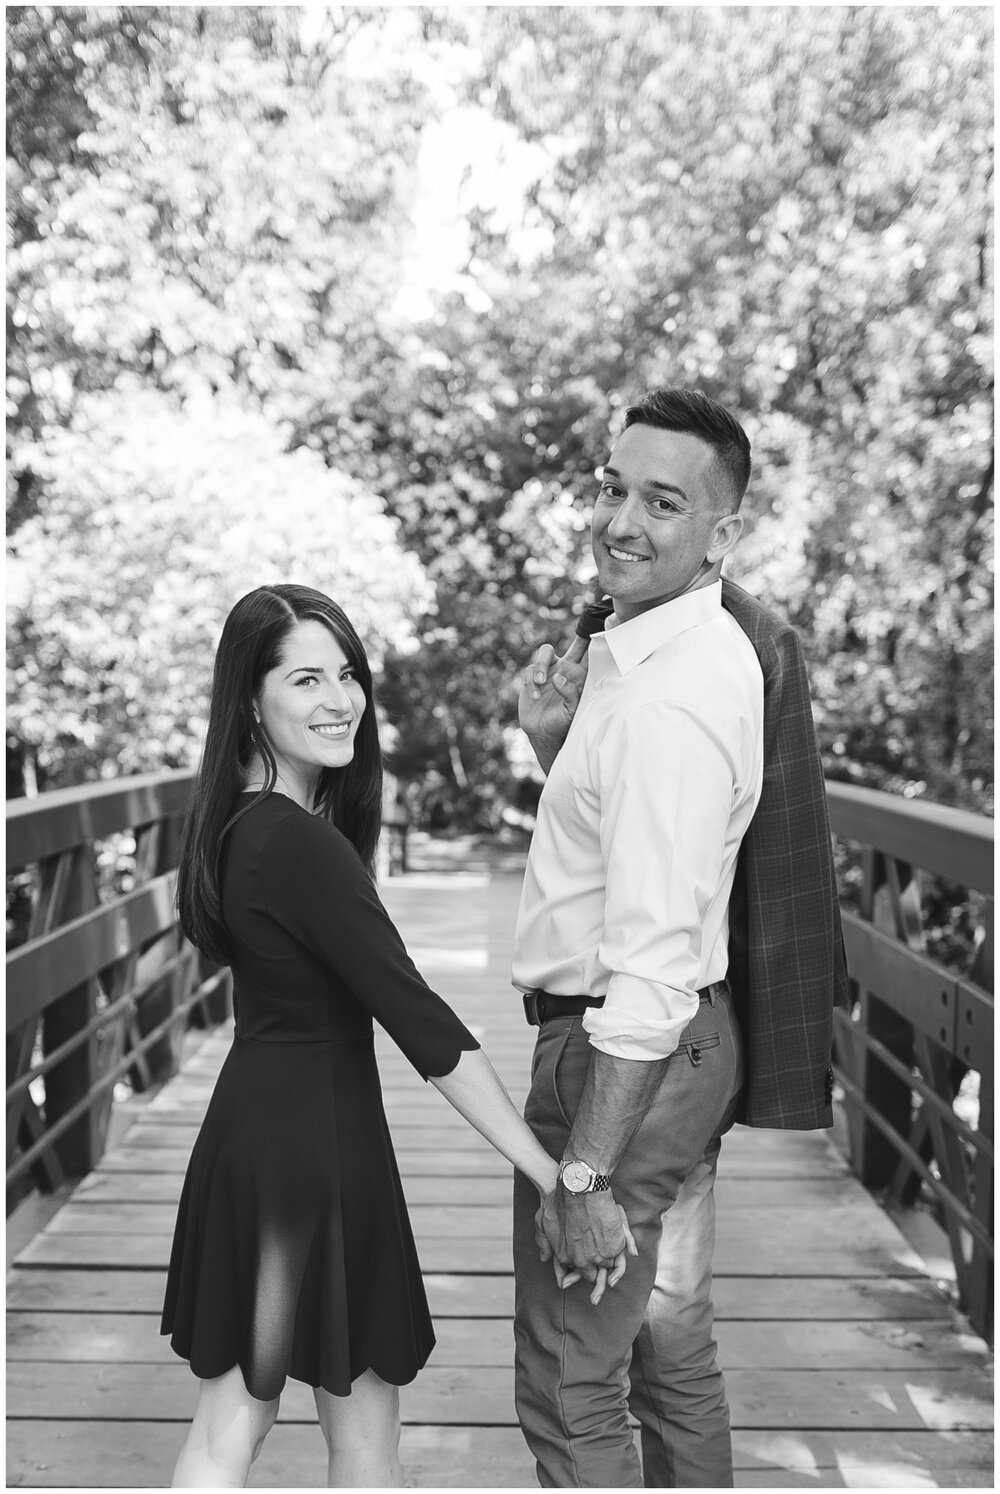 Naperville_Engagement_Kat_and_Zach_bw-33.jpg